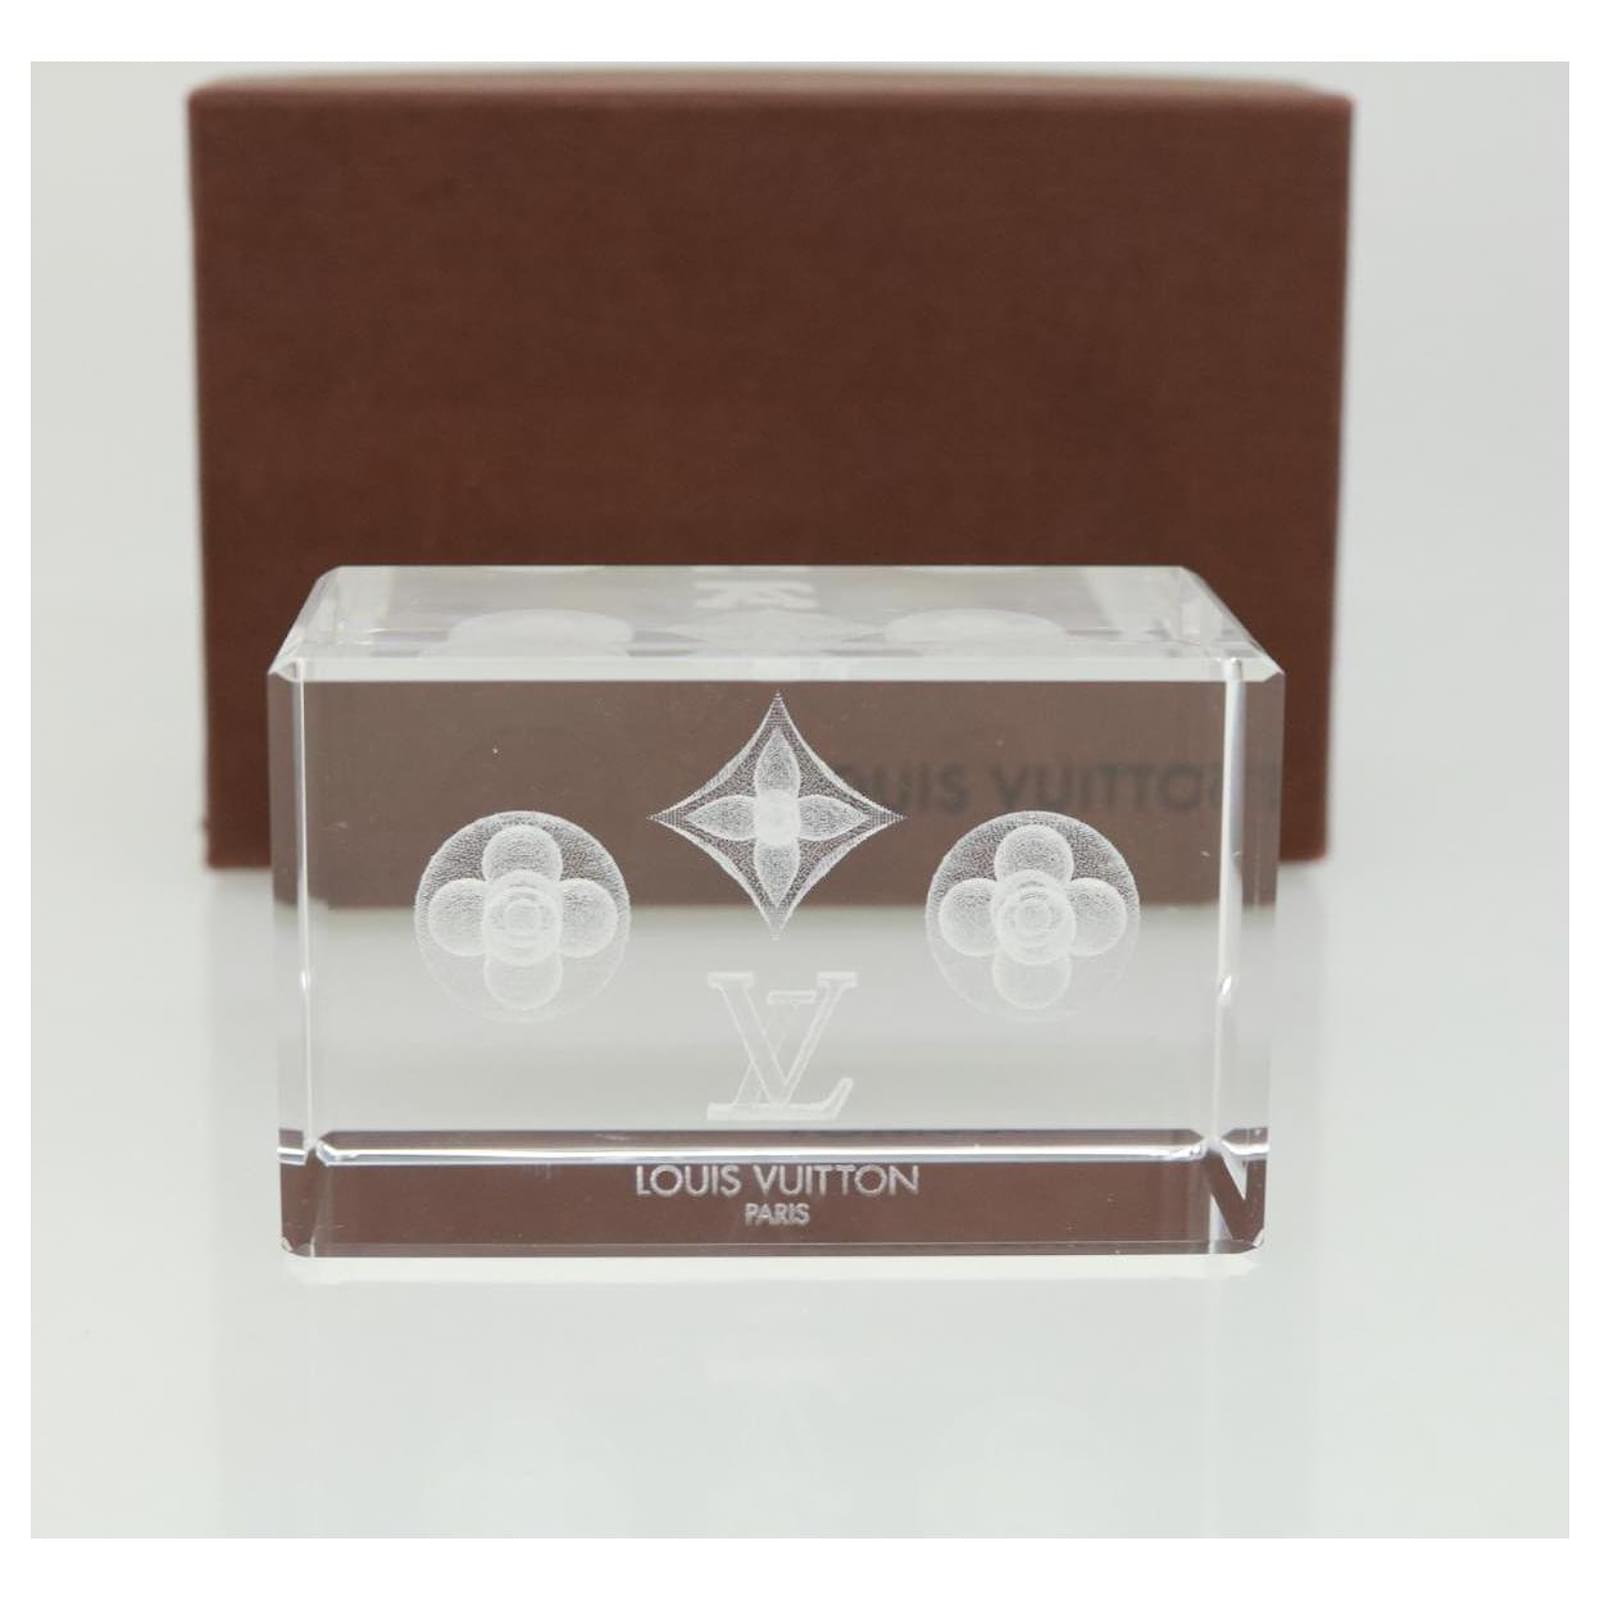 LOUIS VUITTON crystal Paper weight Glass VIP only Clear LV Auth